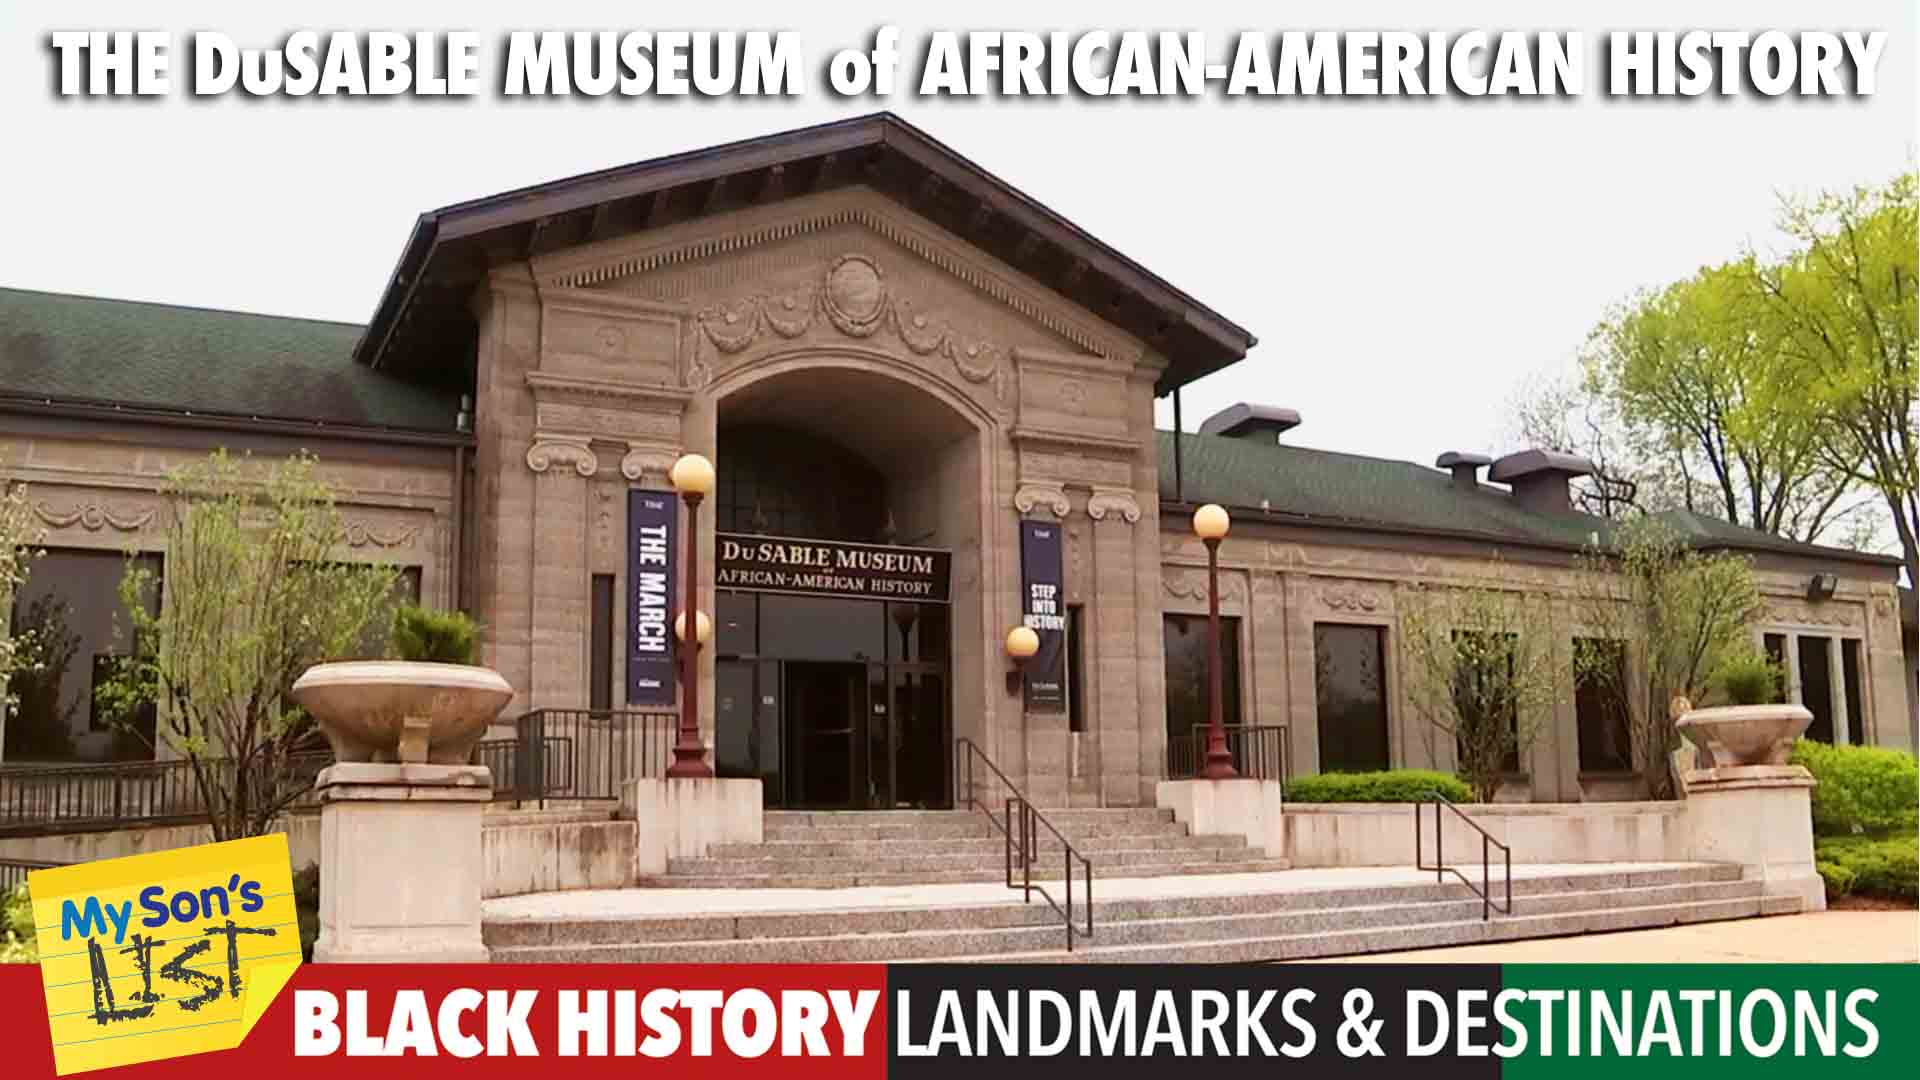 African-American Landmarks: The DuSable Museum of African American History